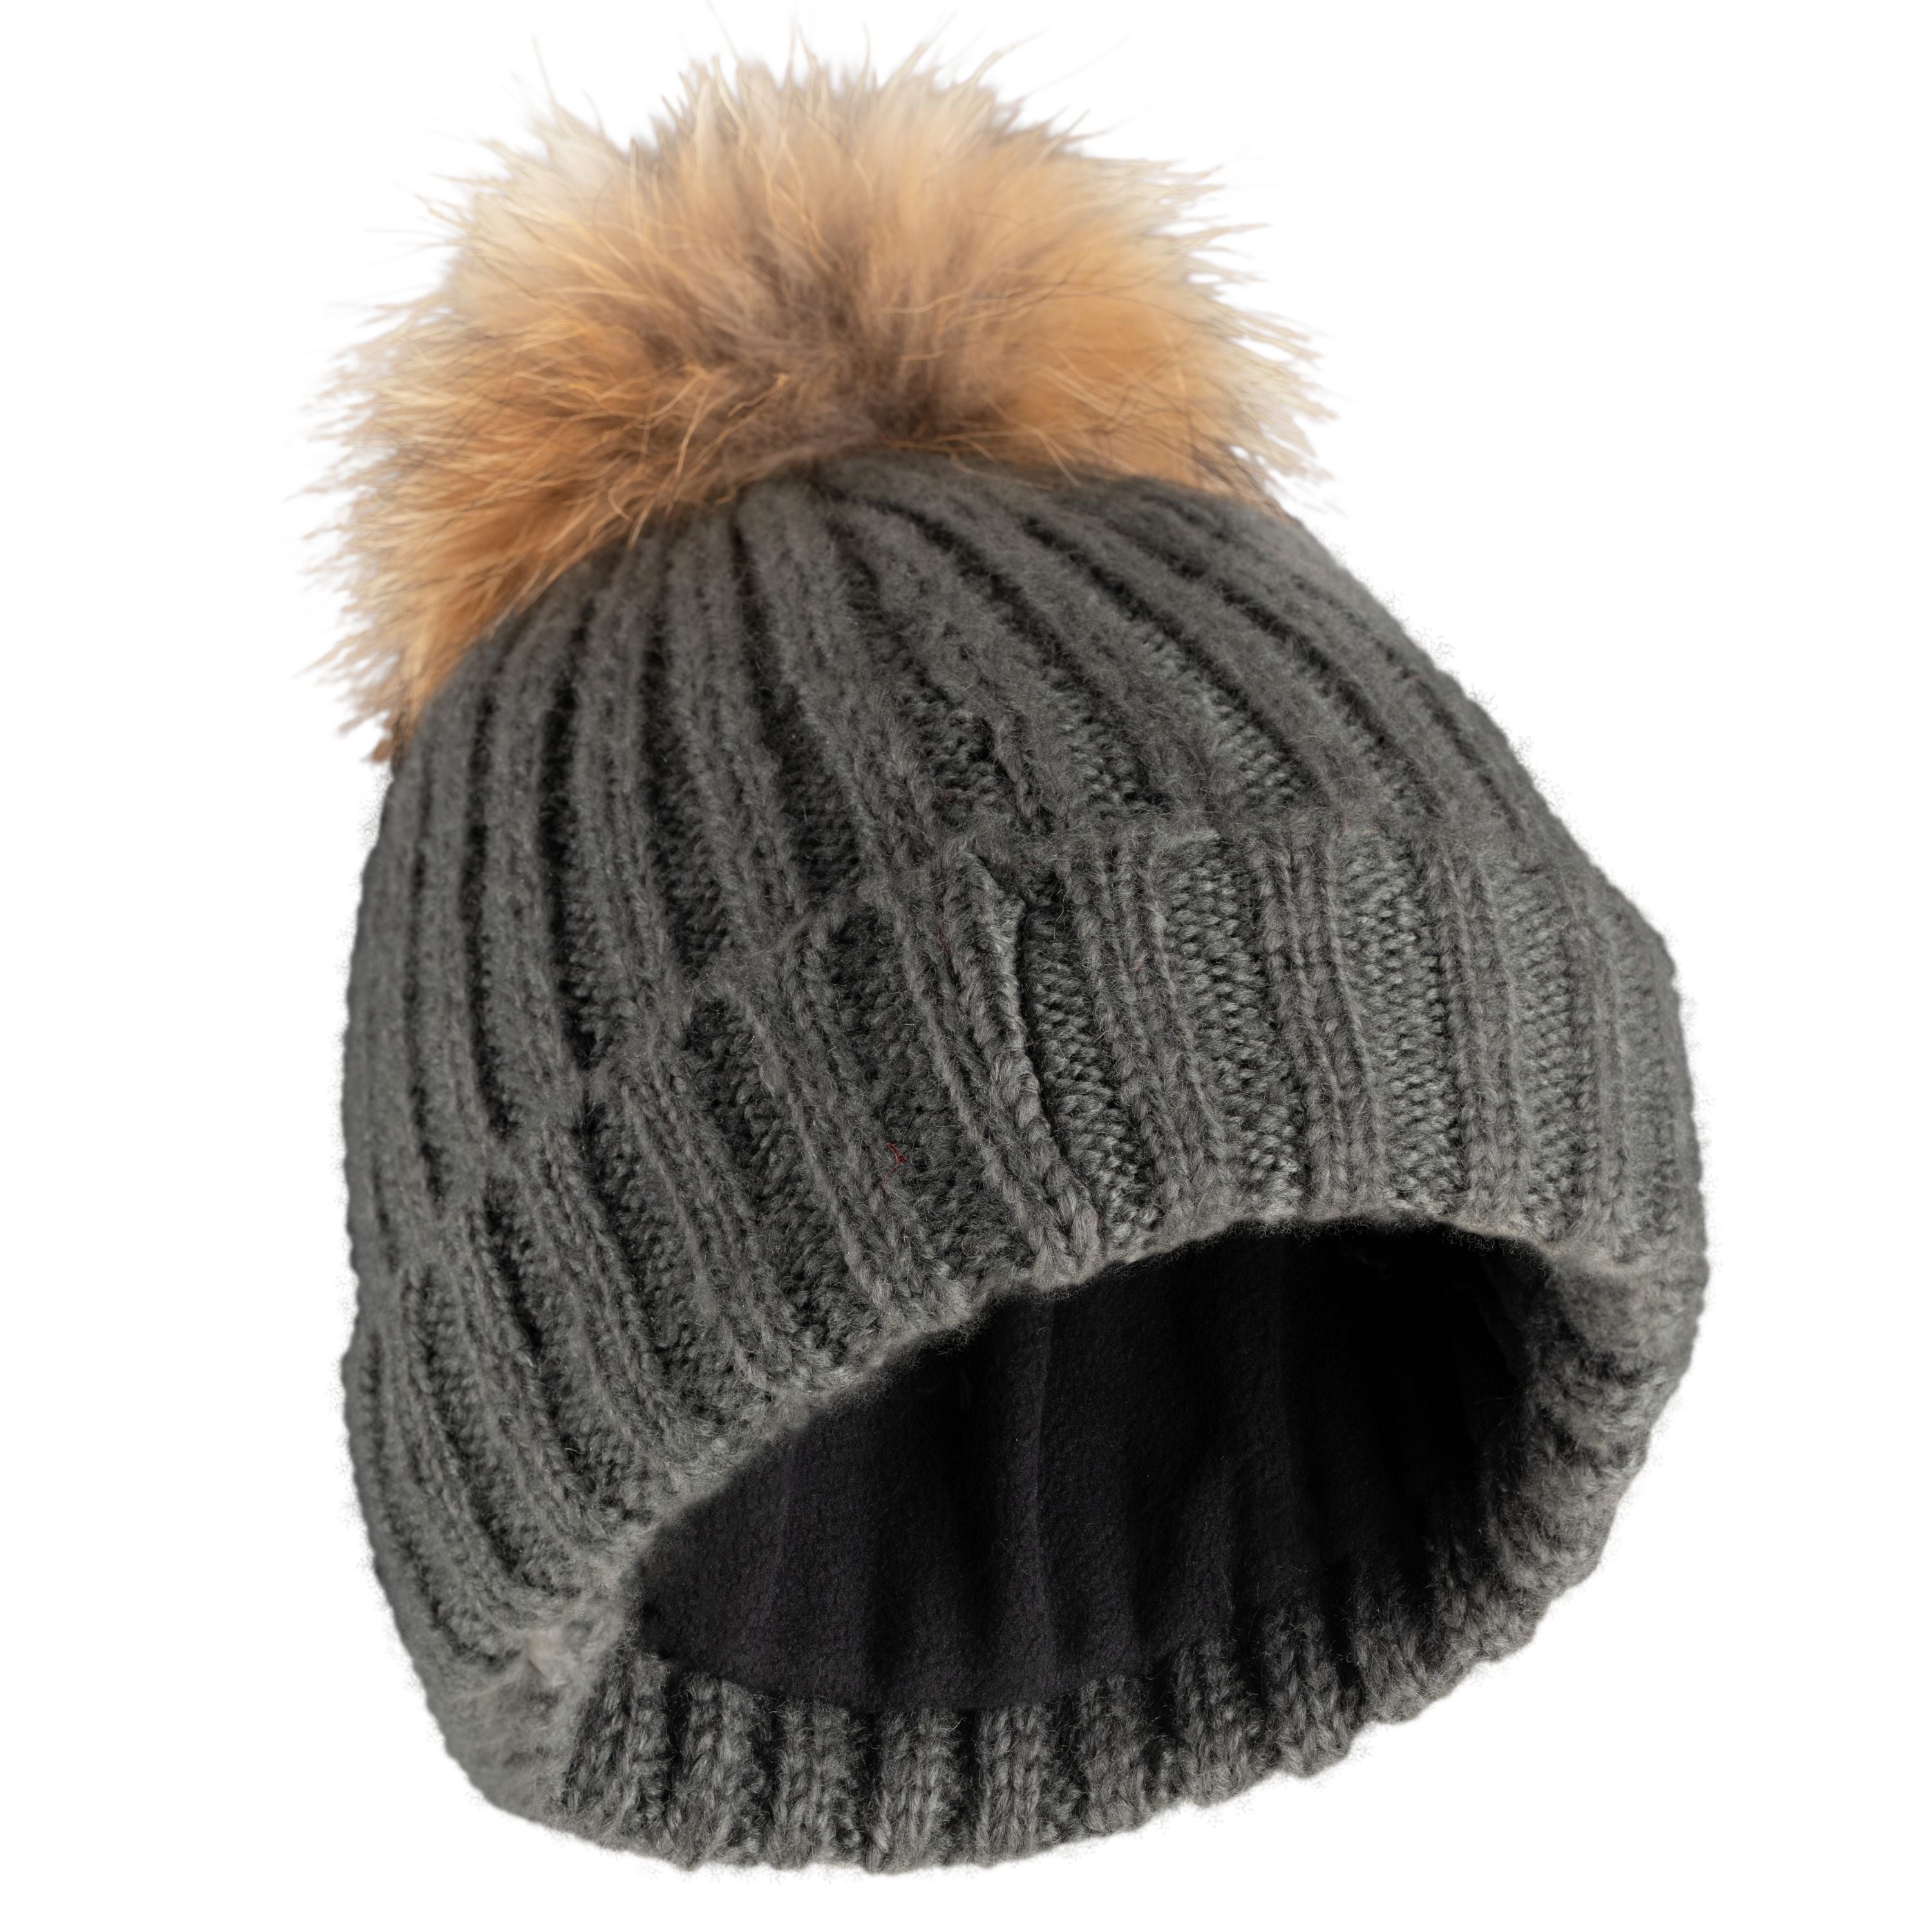 Tuque "Annecy" - Femme